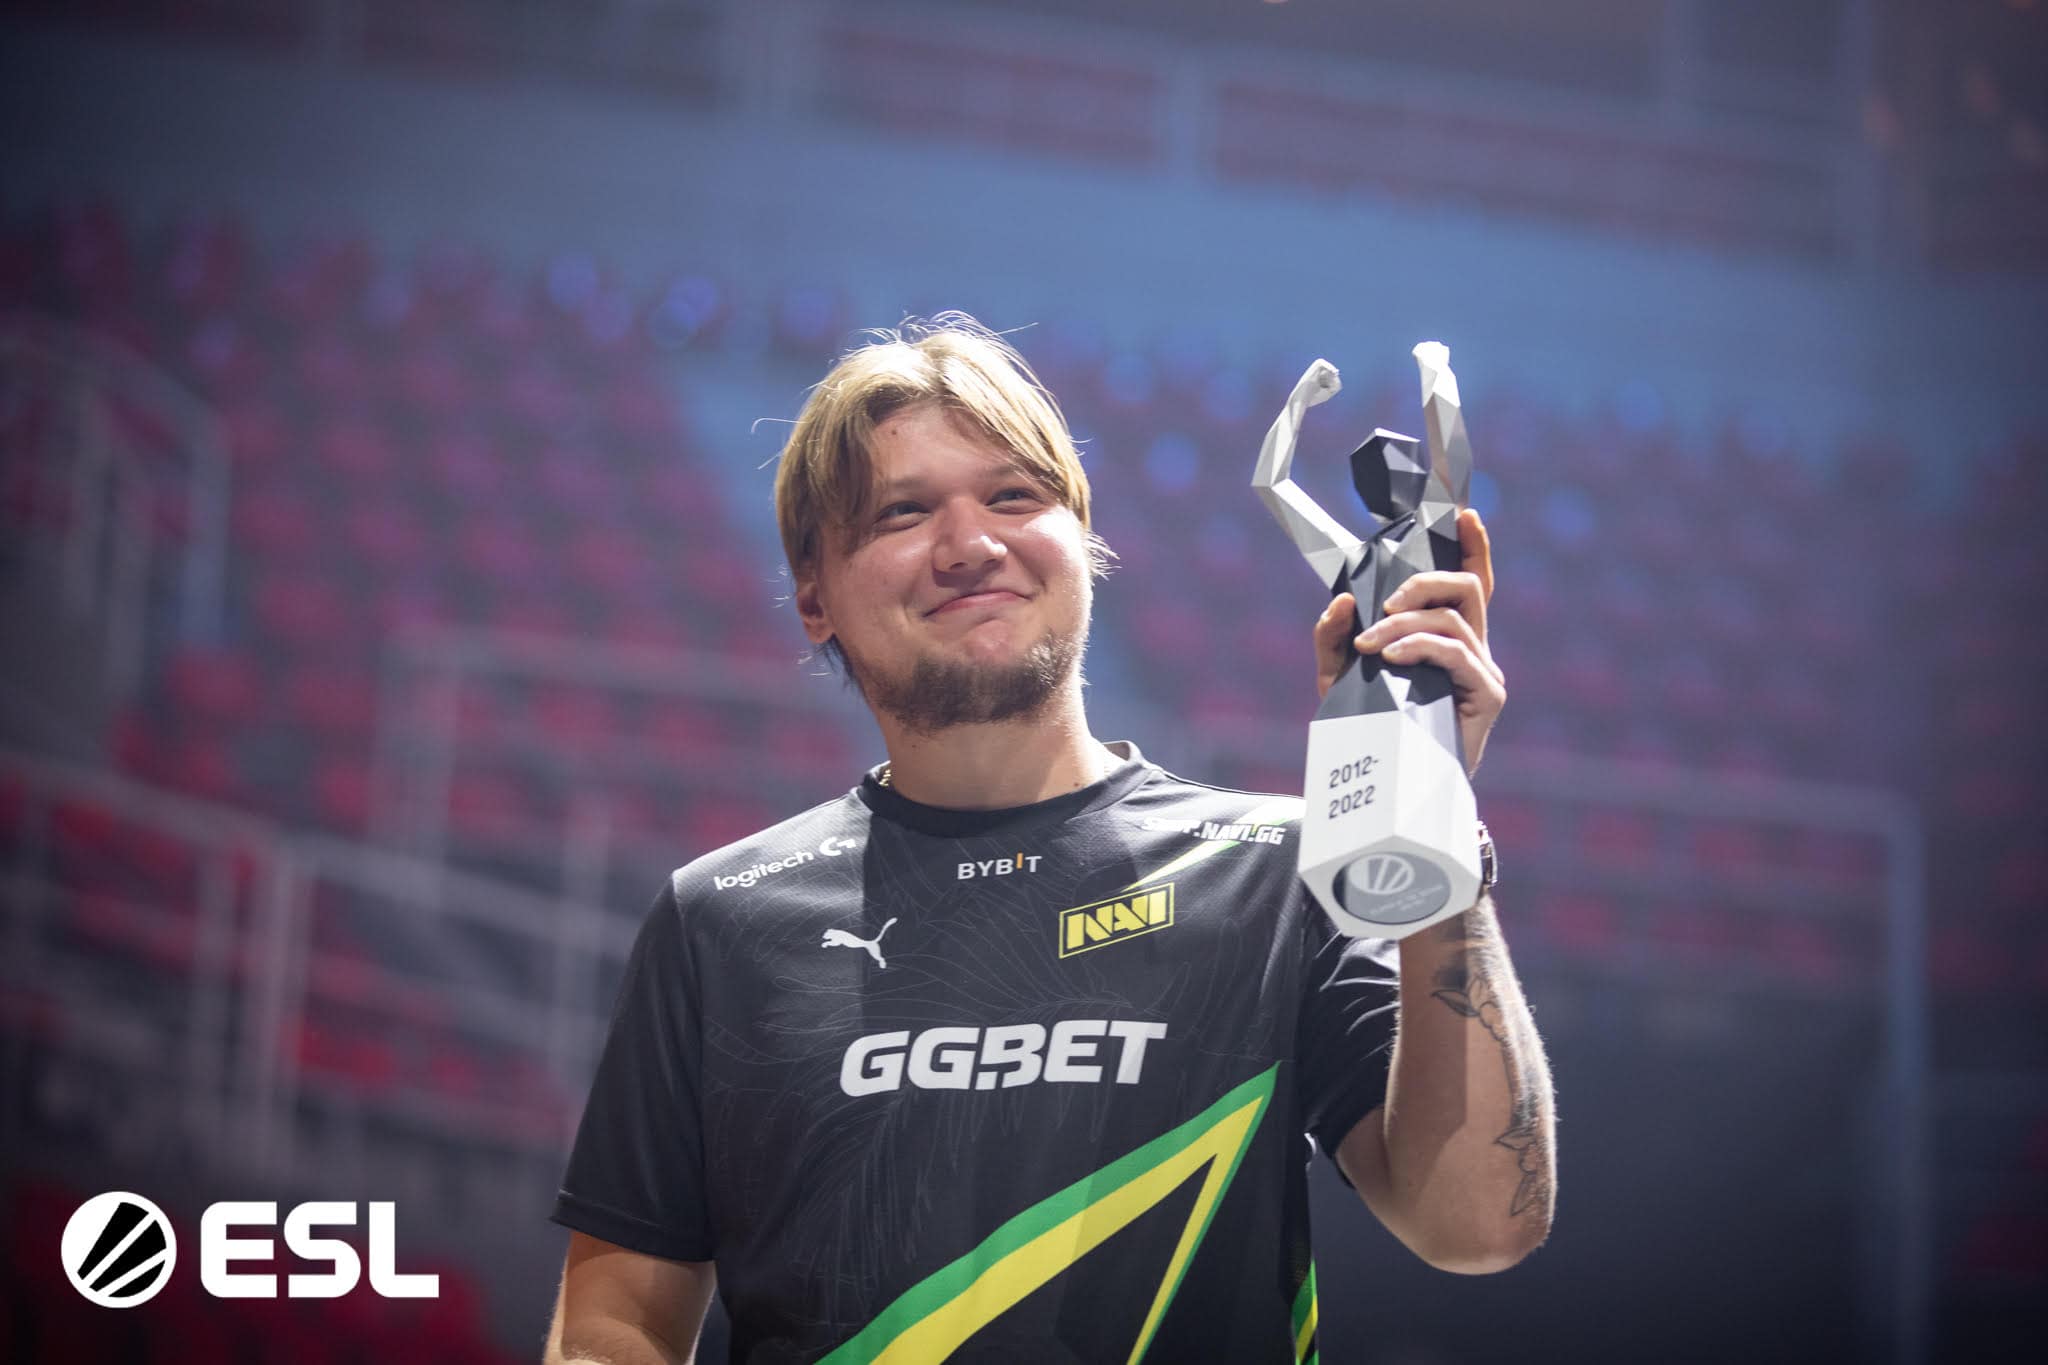 CS:GO Player of the Decade awarded to s1mple